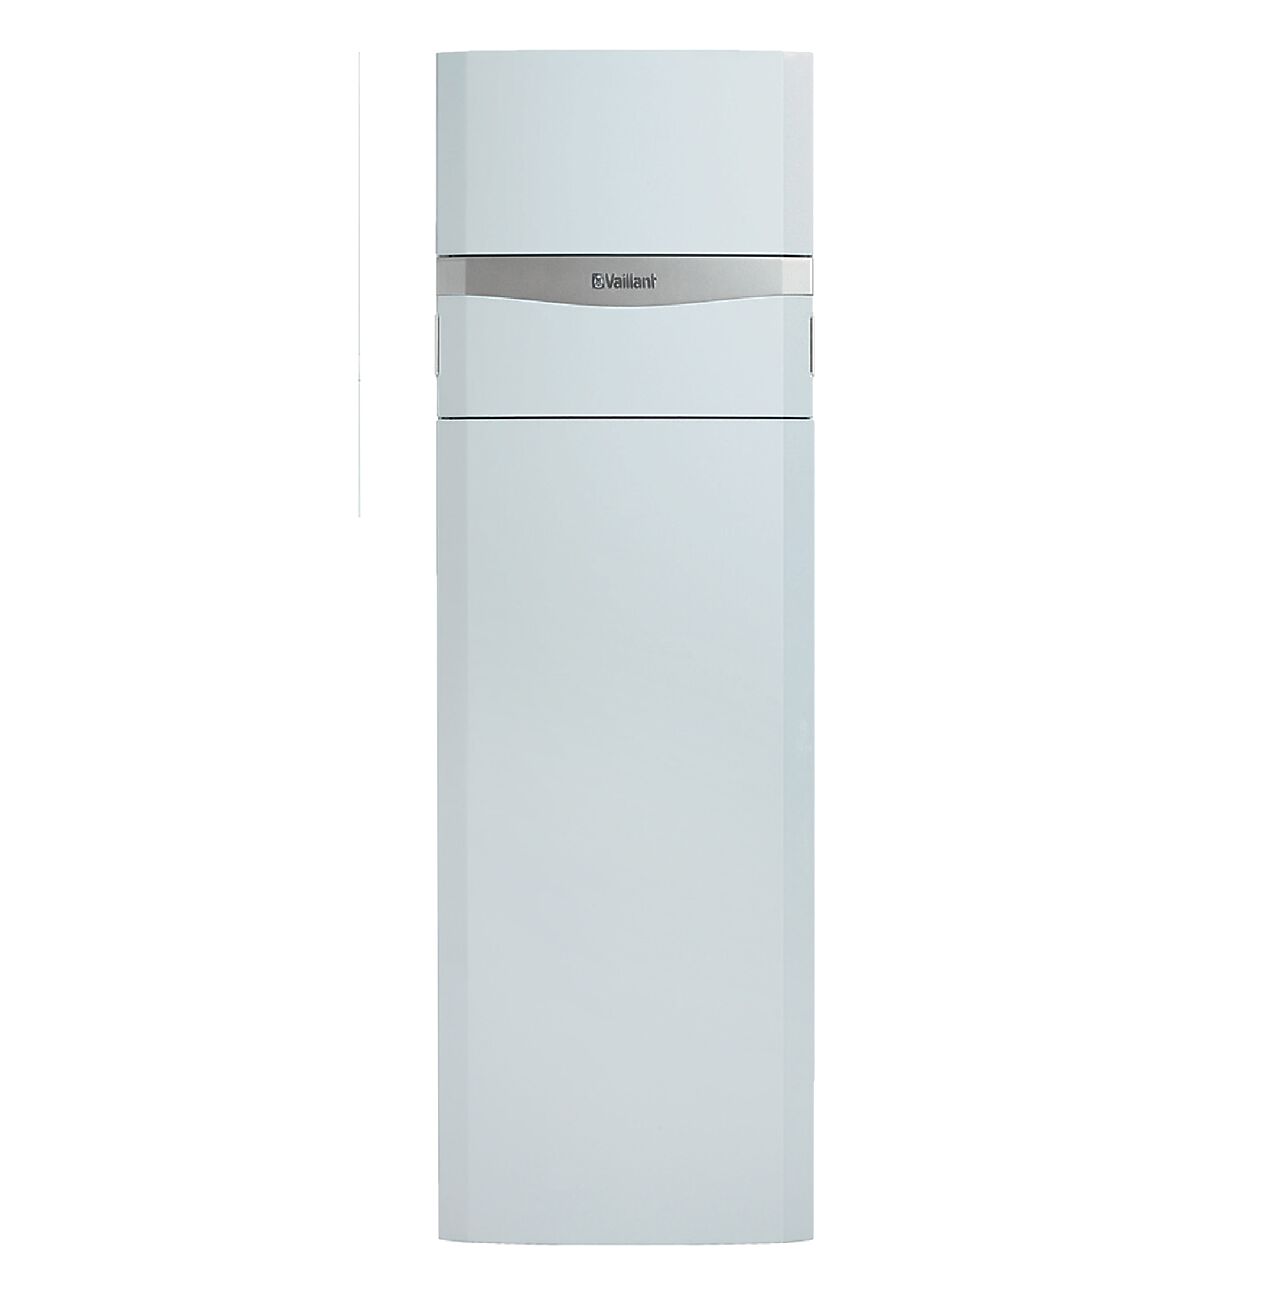 Vaillant uniTOWER VWL 78/5 IS 1